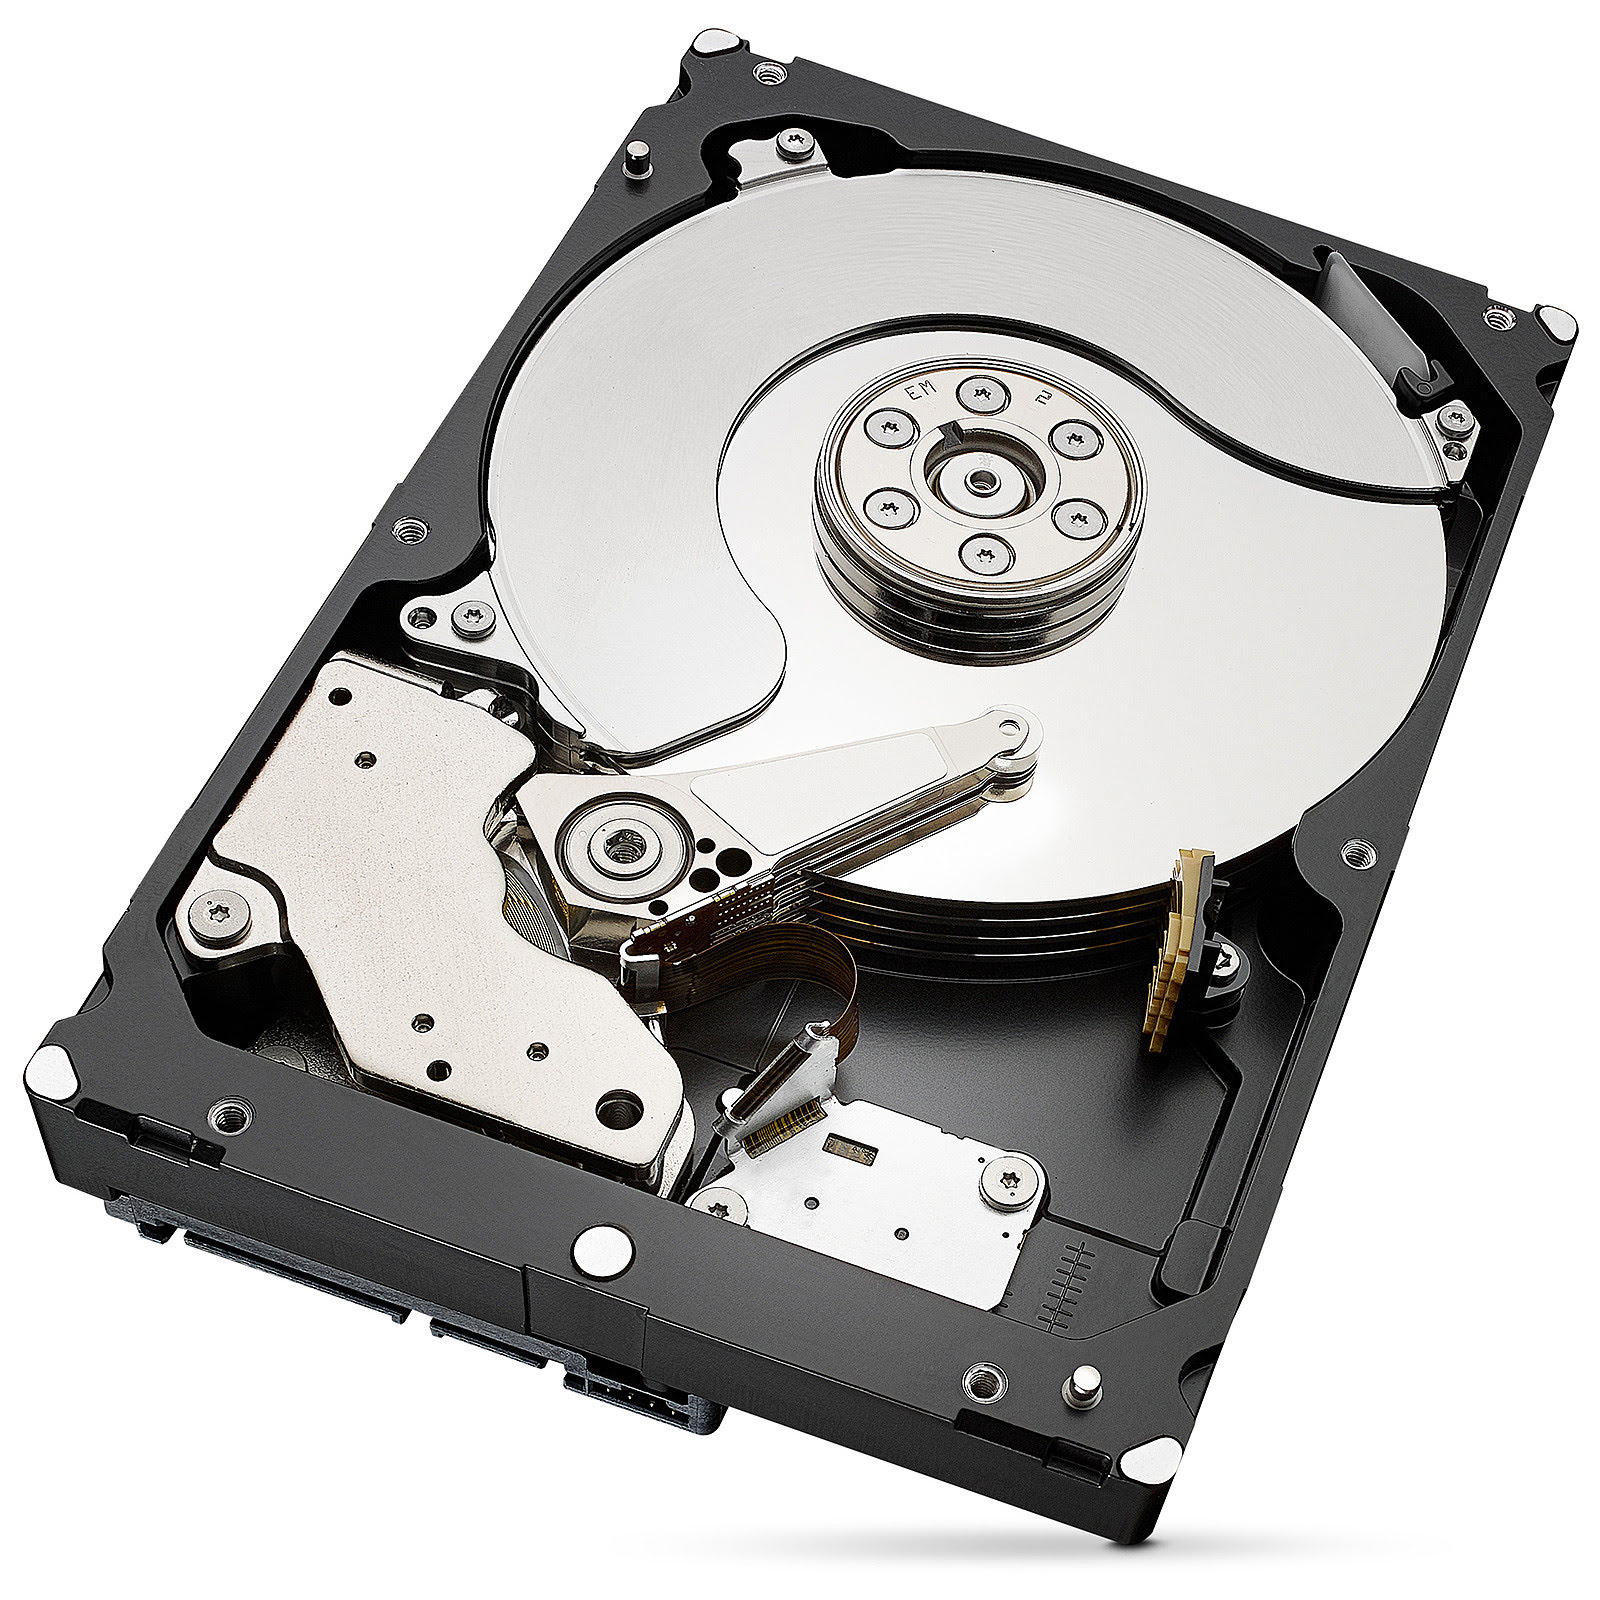 Seagate - Disque dur 3.5 pour NAS IronWolf ST4000VN006 - 4To